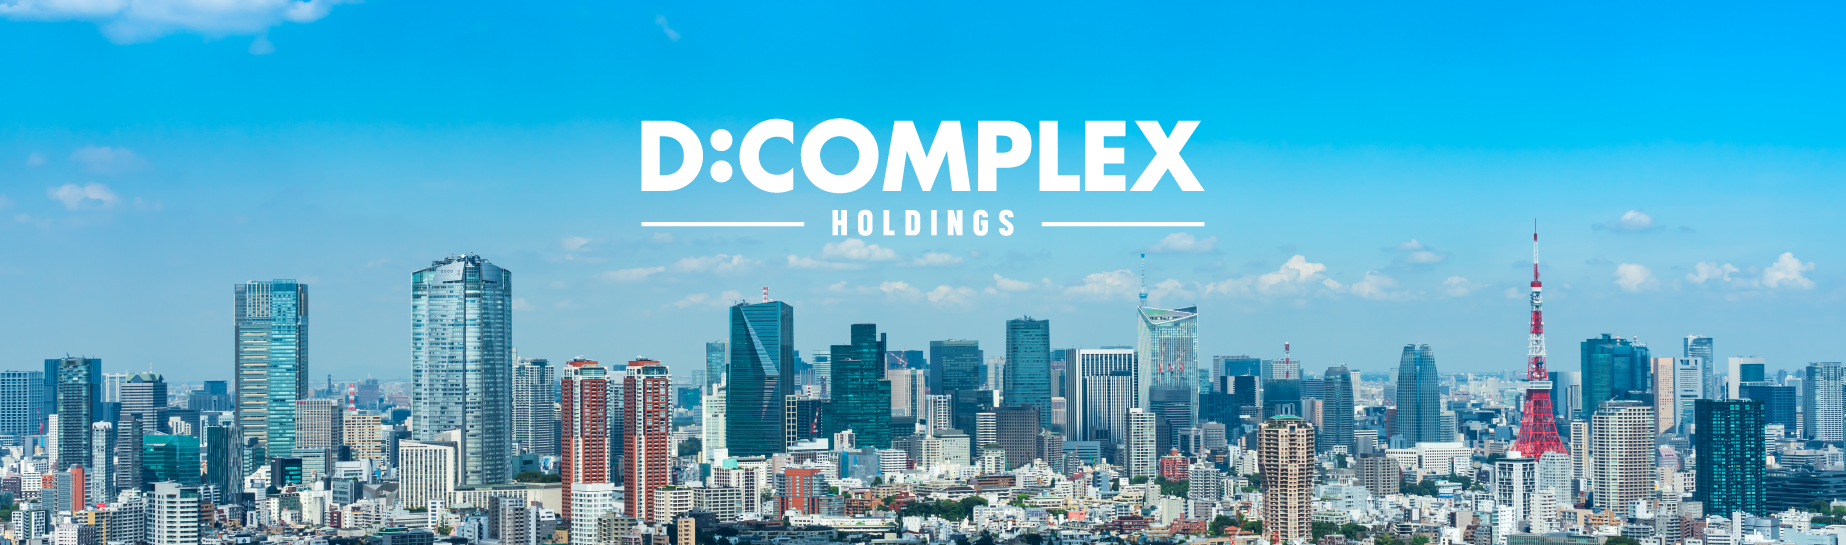 D:COMPLEX HOLDINGS